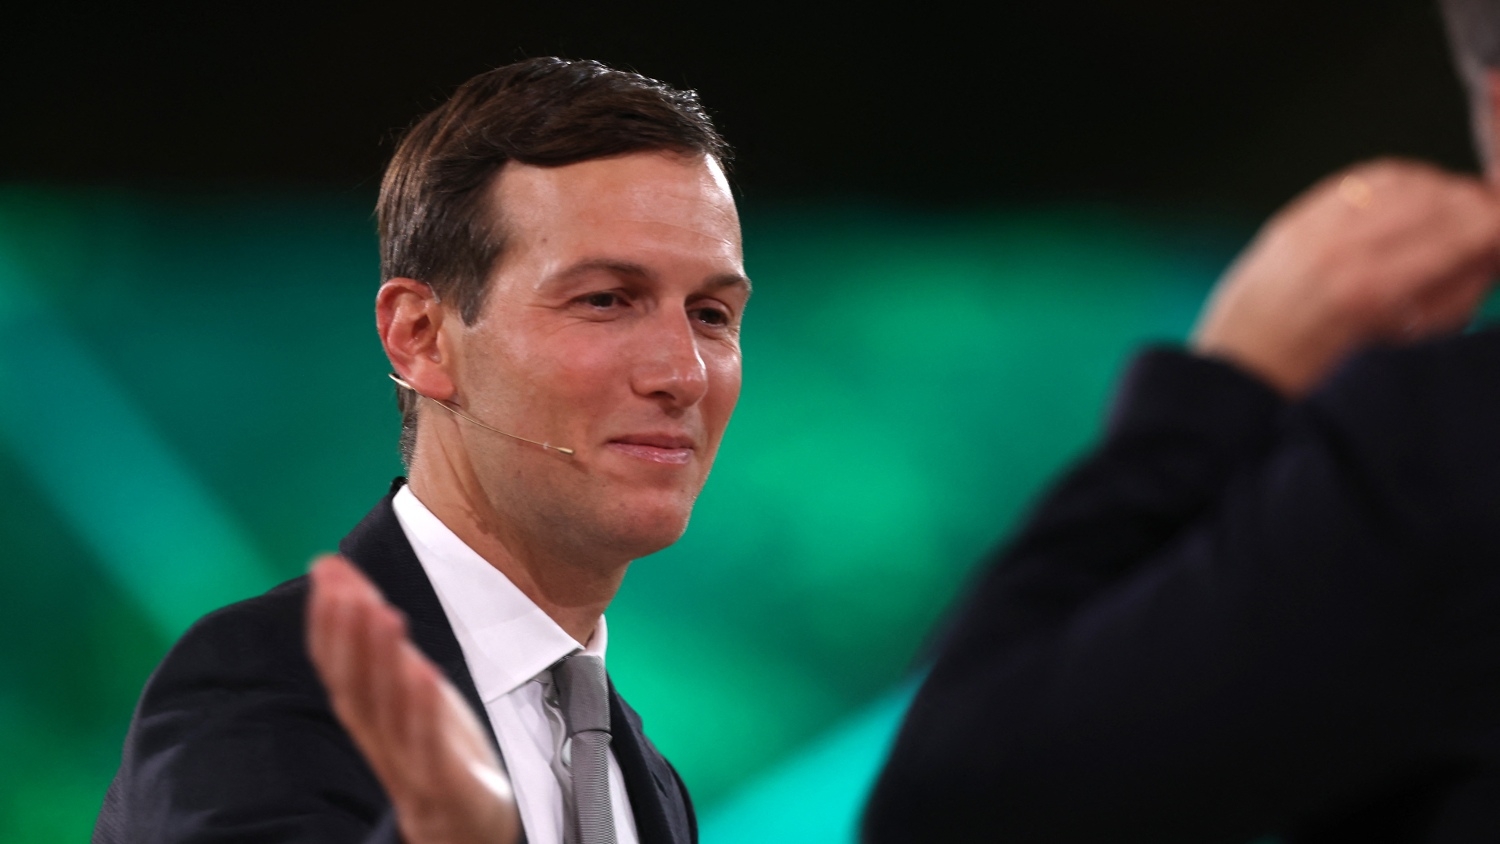 Jared Kushner gestures as he attends the annual Future Investment Initiative conference in the Saudi capital Riyadh on 25 October 2022.